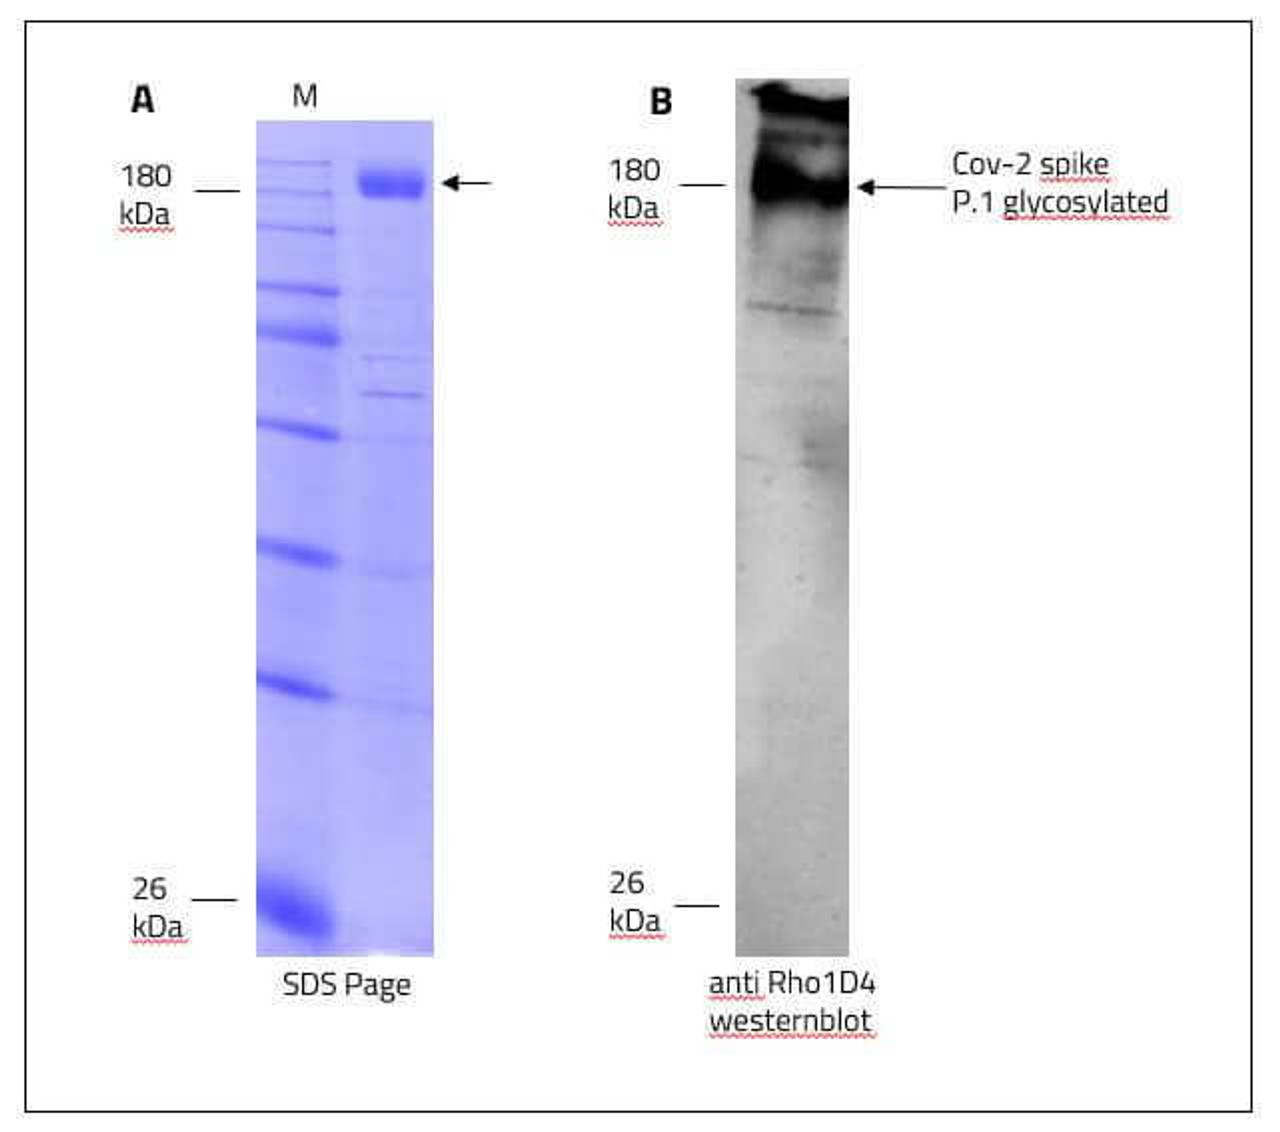 Figure 1: Data from our lab regarding SPIKE stabilized in a detergent mycelle.<br>A: SDS-Page of purified SPIKE in detergent mycelle.<br>B: Western blot of Rho1d4 tagged SPIKE, originated from the SDS Page seen in "A".